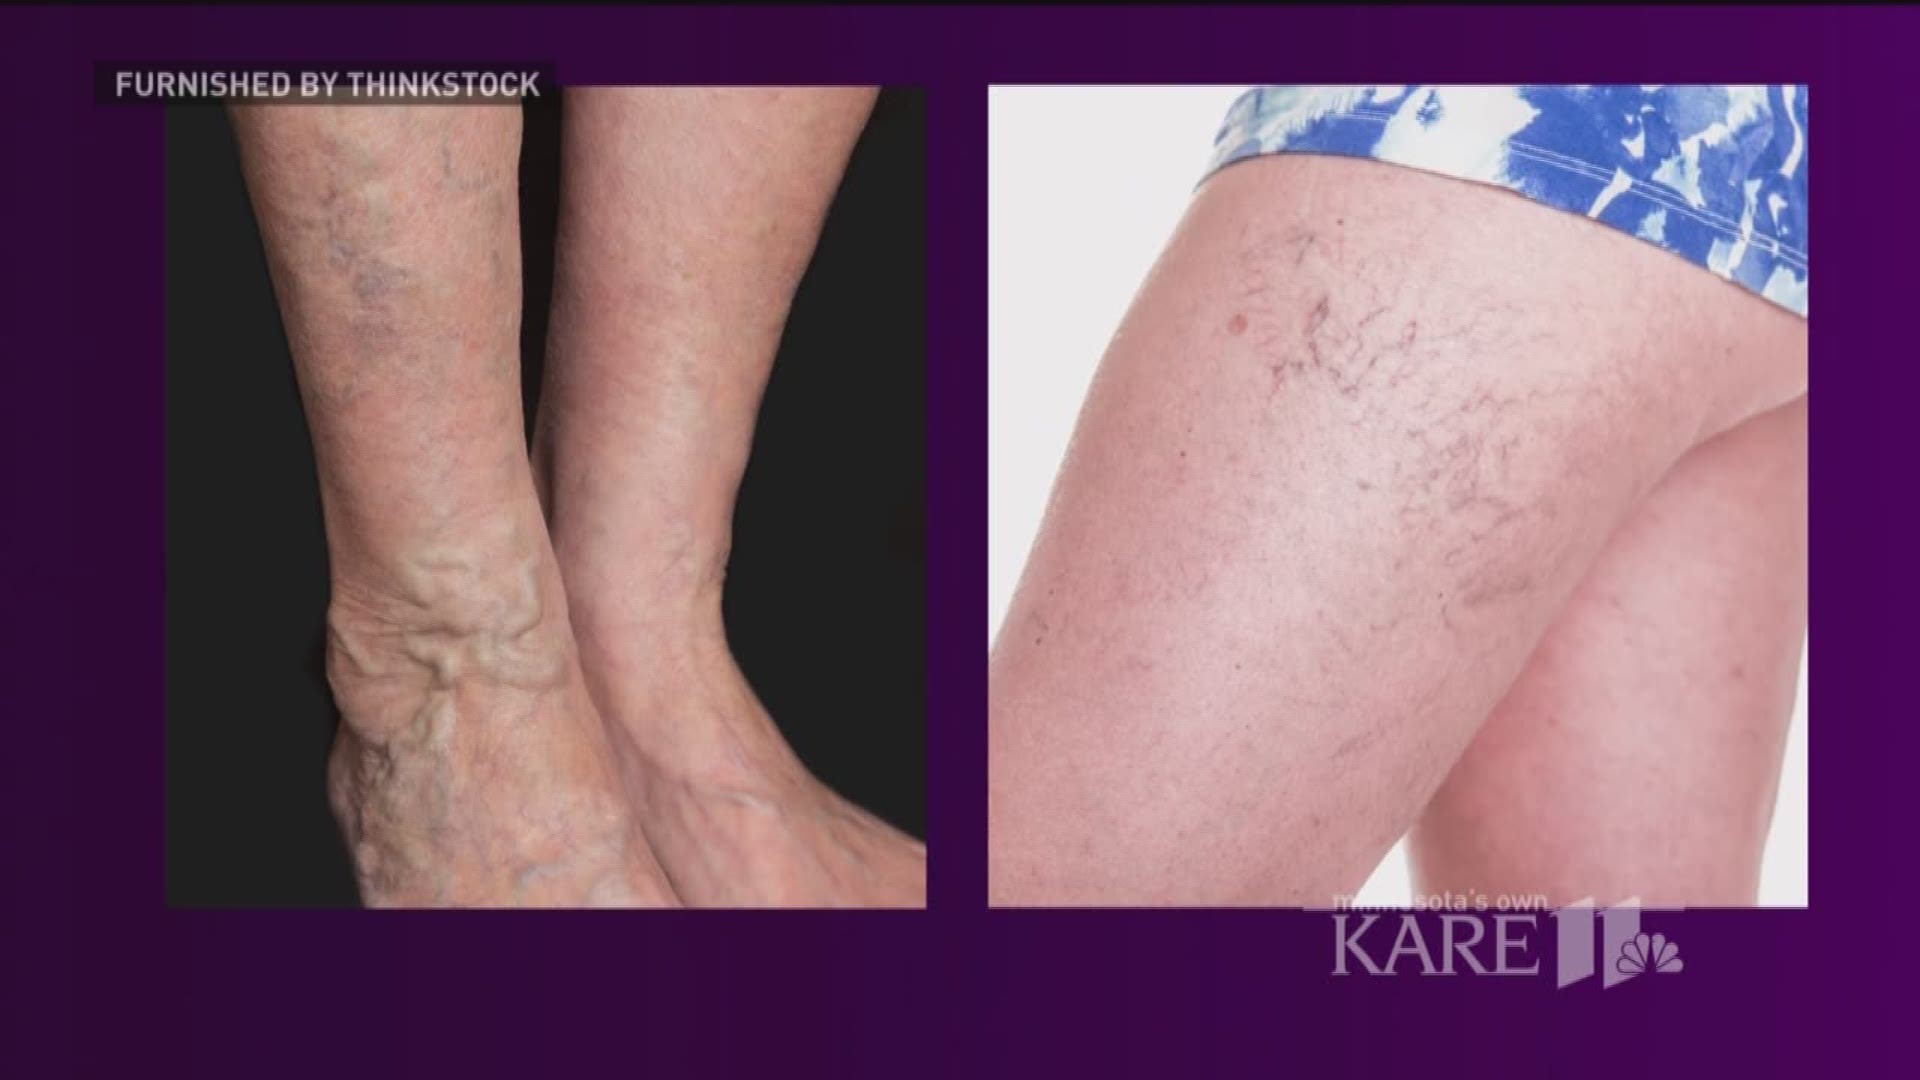 Dr. Joseph Karam, a Vascular Surgeon with the Minneapolis Heart Institute and Allina Health joined us to talk about varicose veins and what they may say about our overall health.